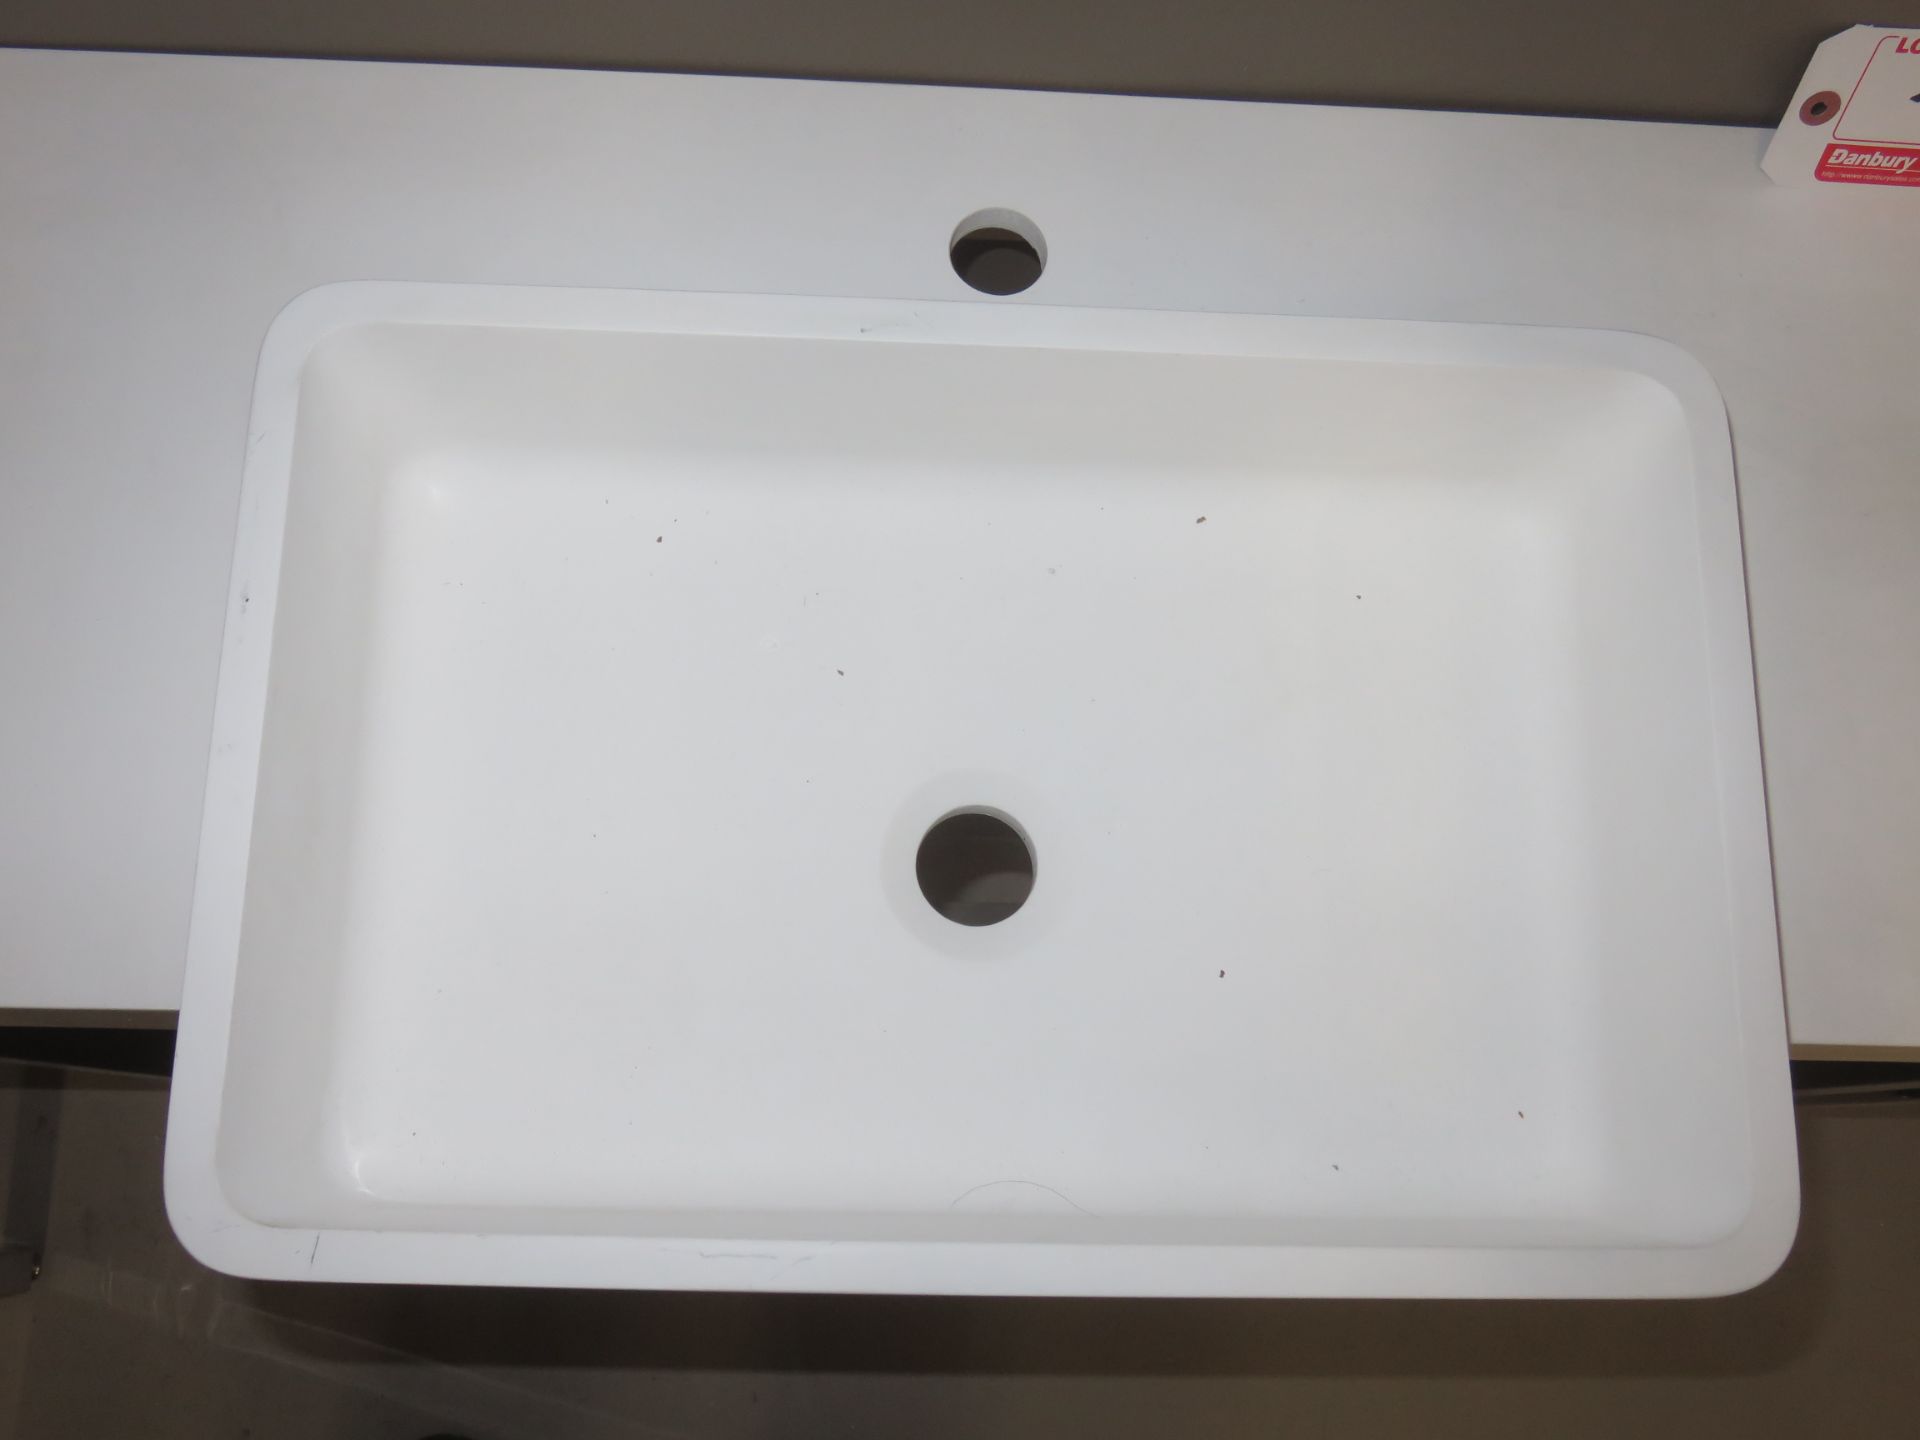 TOP BATH METRO WHITE COMPOSITE + BRUSHED S/S STAND 39.75"W X 17" SINGLE HOLE VANITY SINK - Image 2 of 2